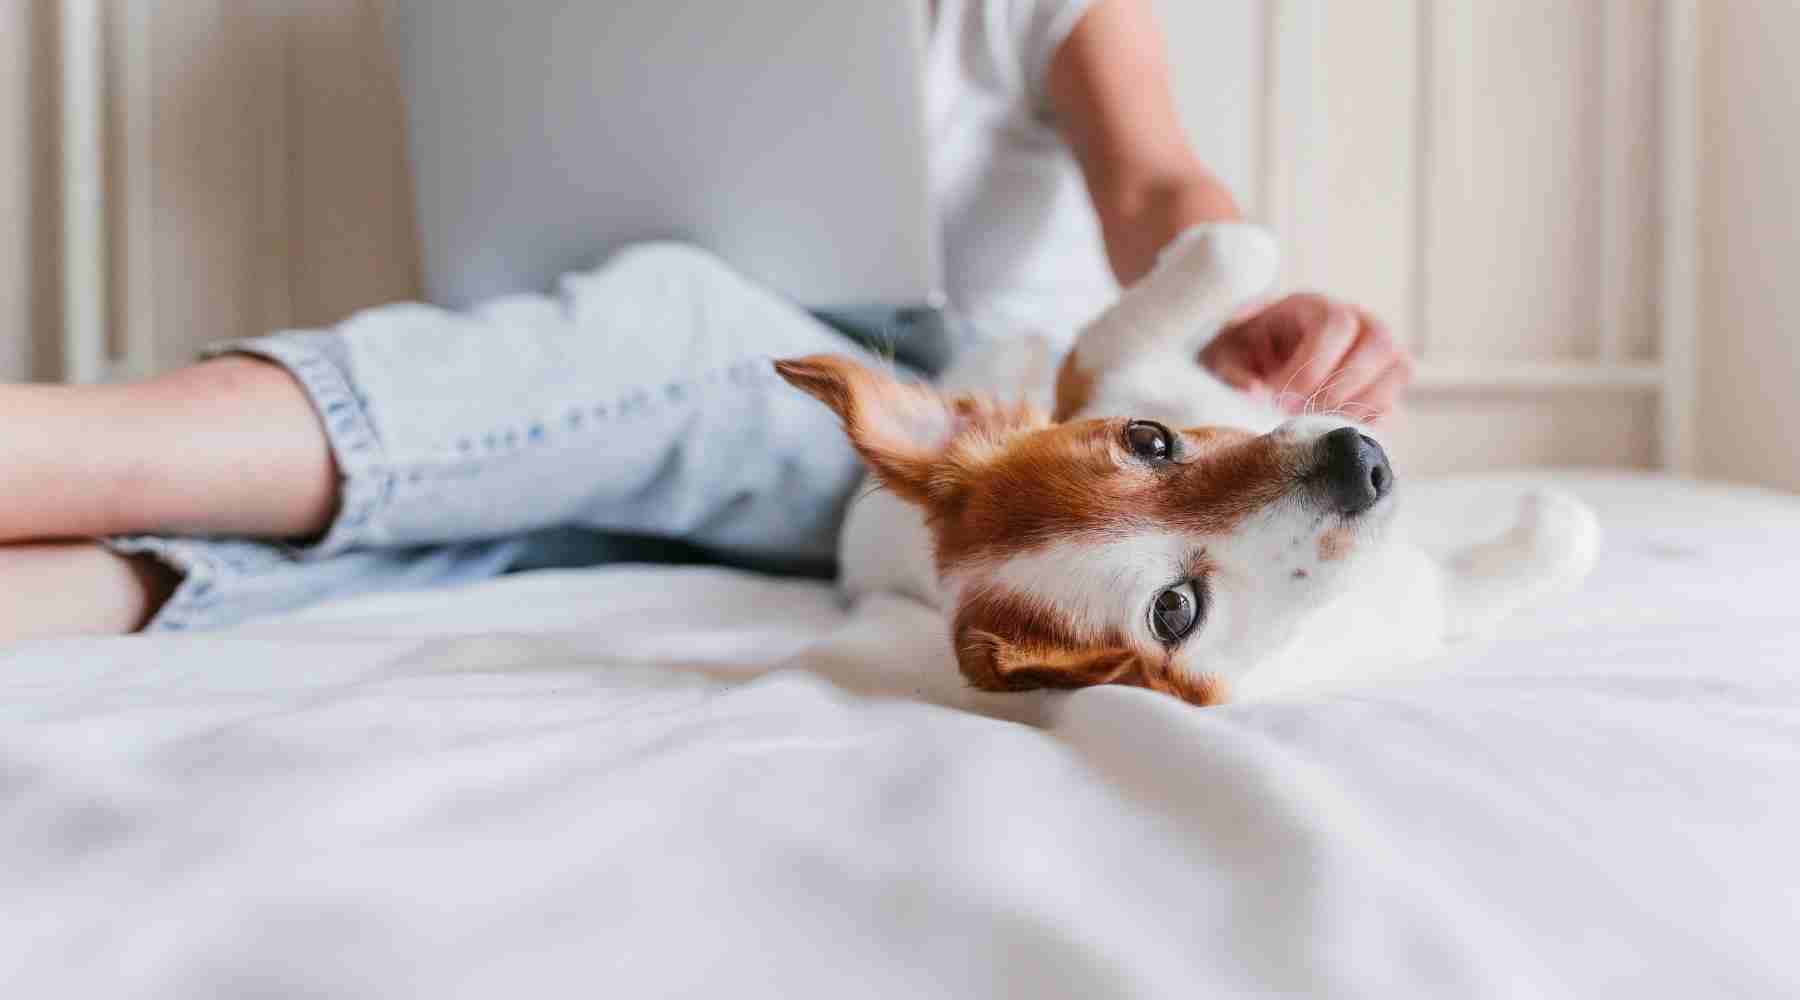 How to Make $400 Fast - Pet Sitting